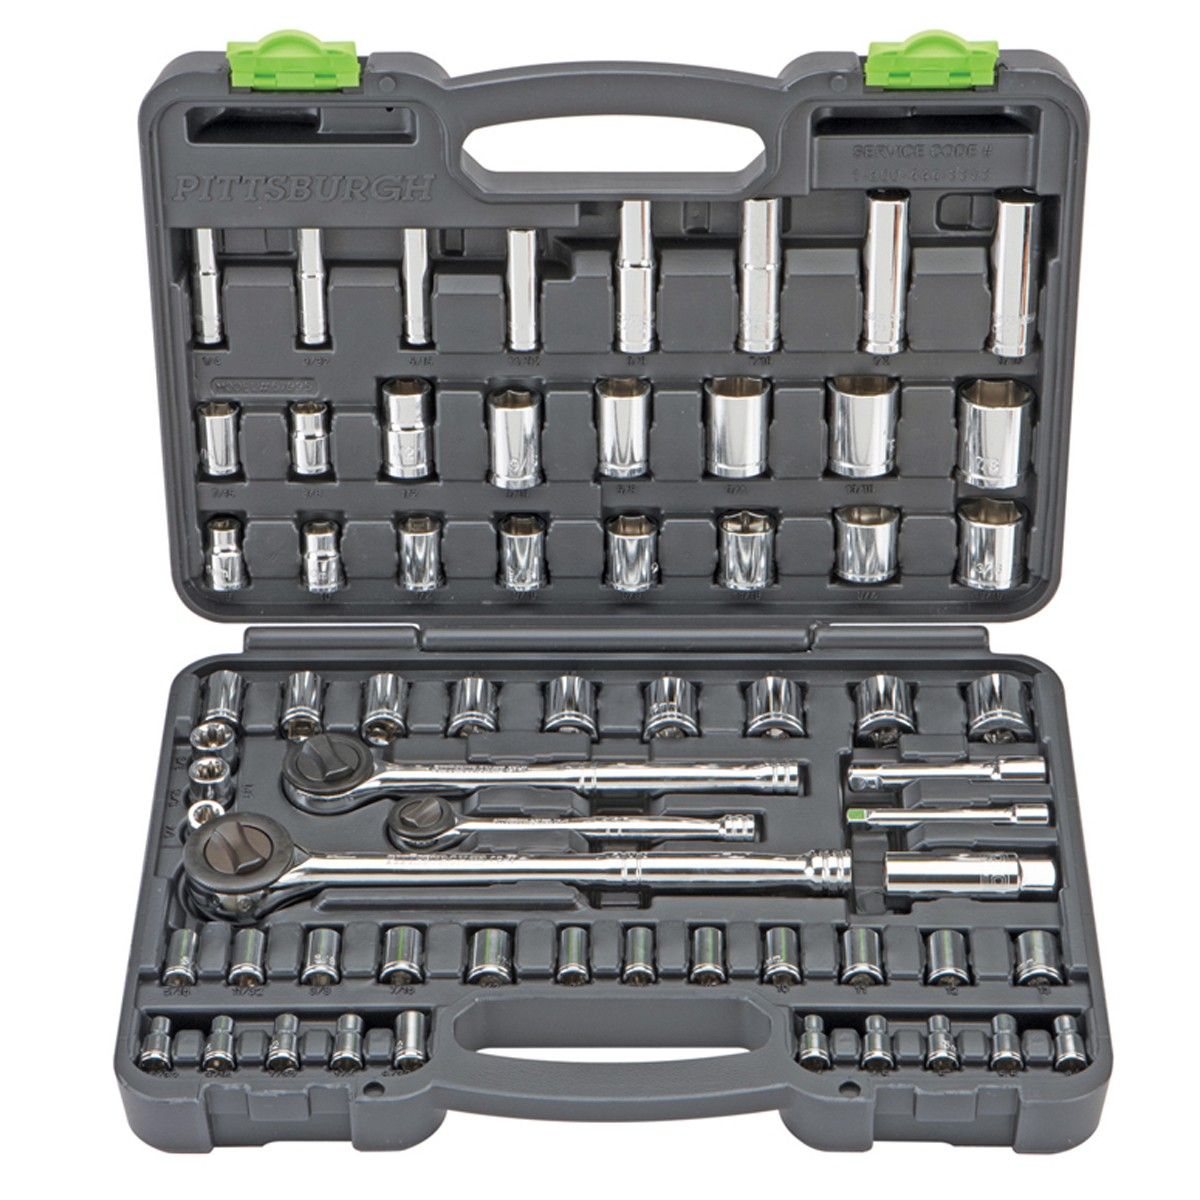 How to open pittsburgh socket set